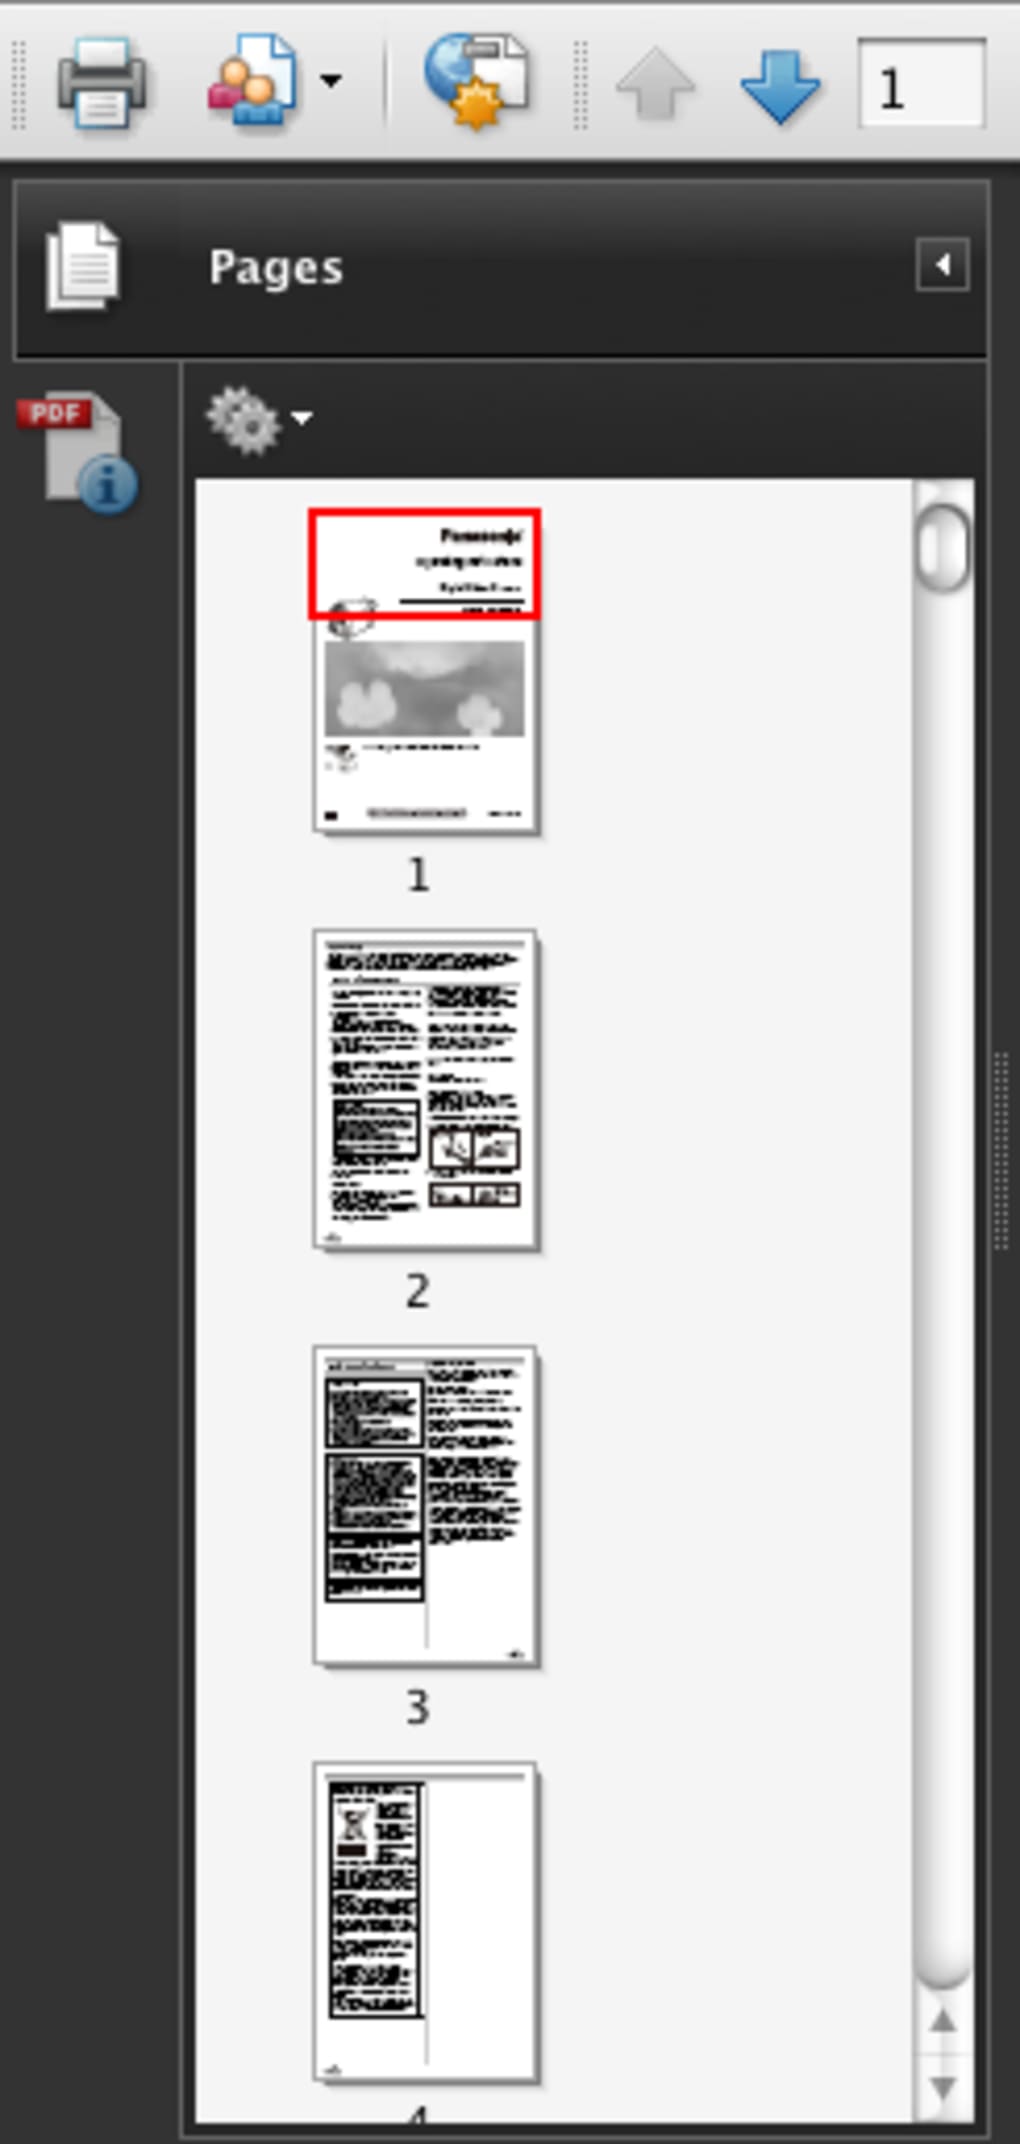 unable to open pdf files on mac